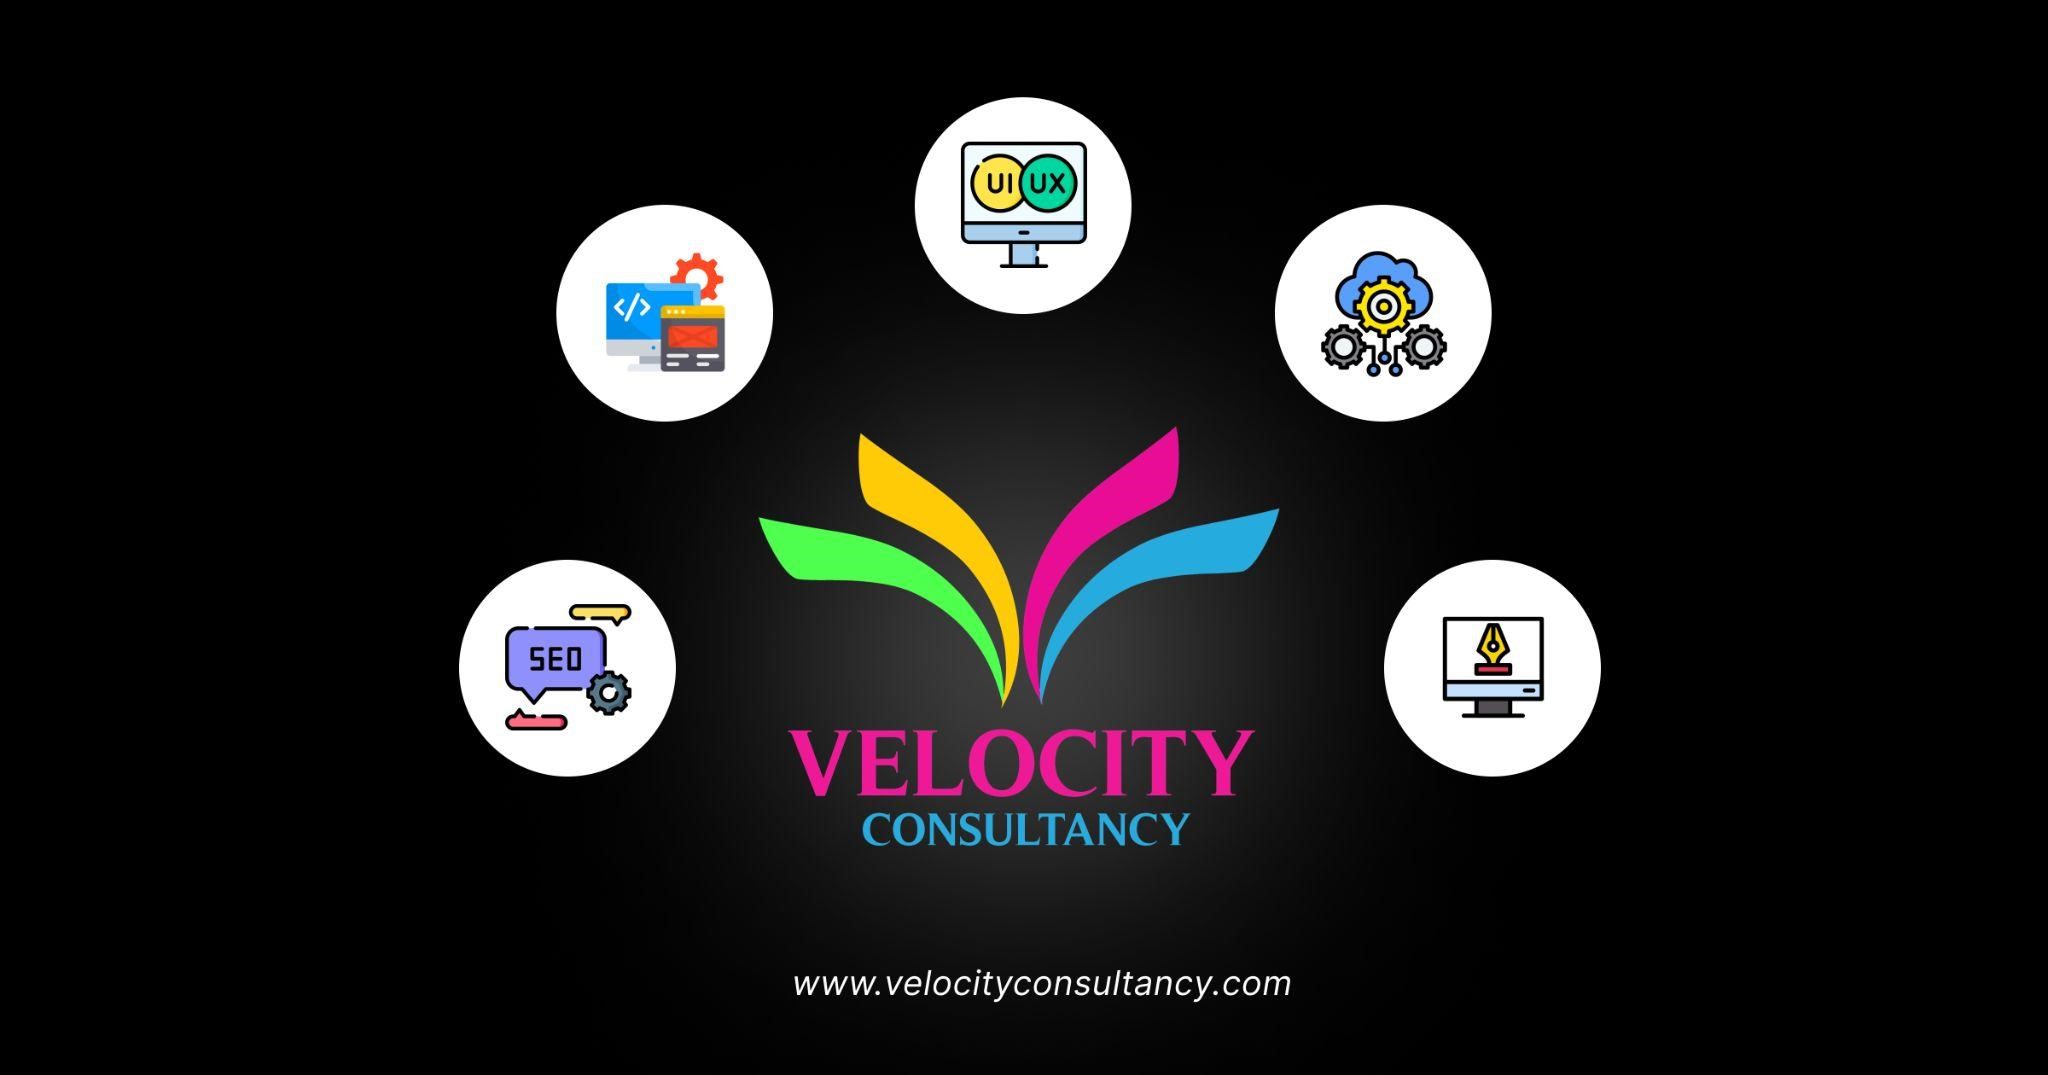 Velocity Consultancy's Pioneering 12-Year Journey from Bootstrapped Beginnings to Exponential Growth